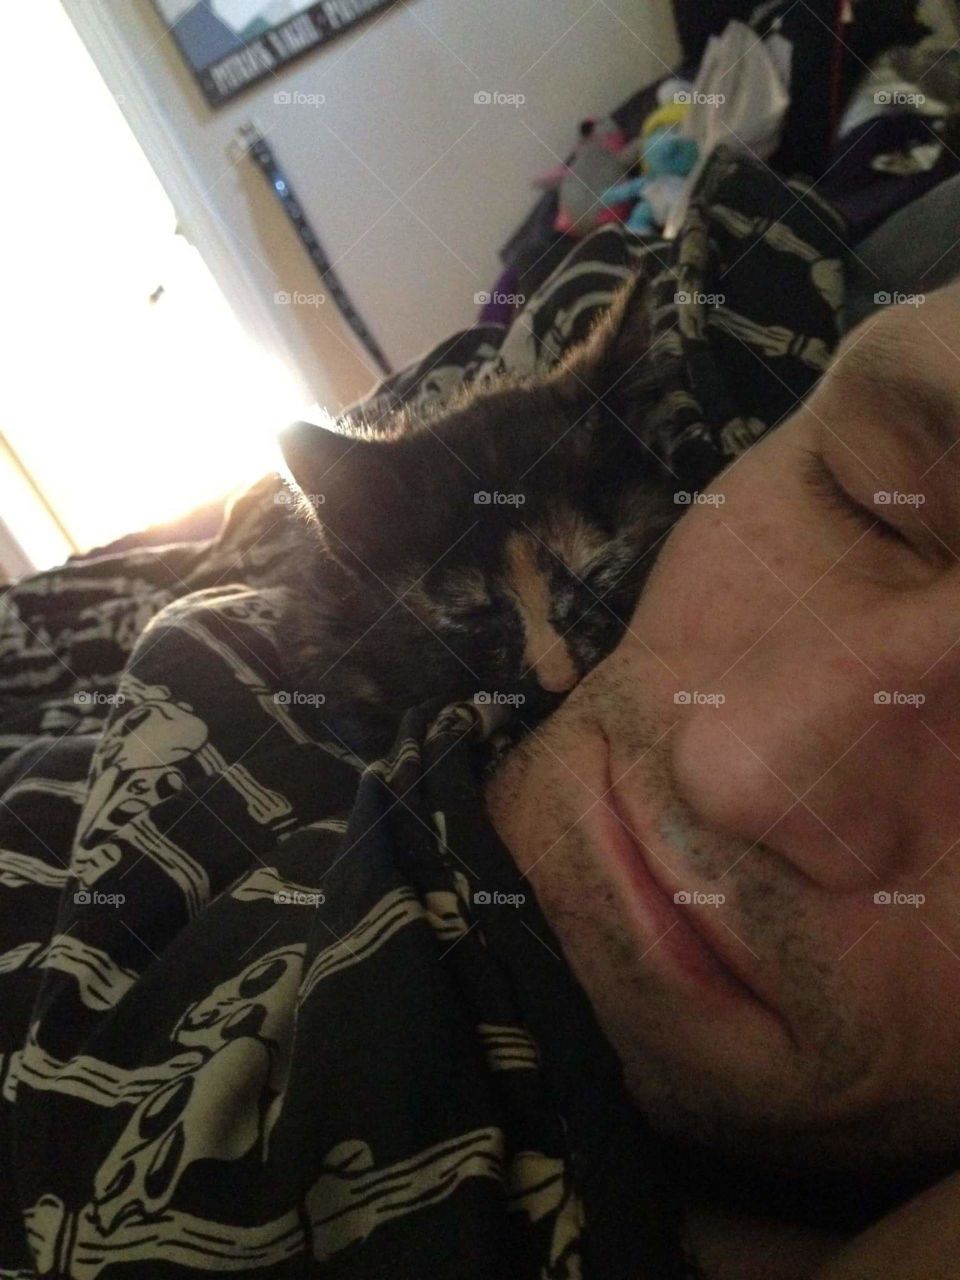 My hubby and my little Circe kitty asleep together.